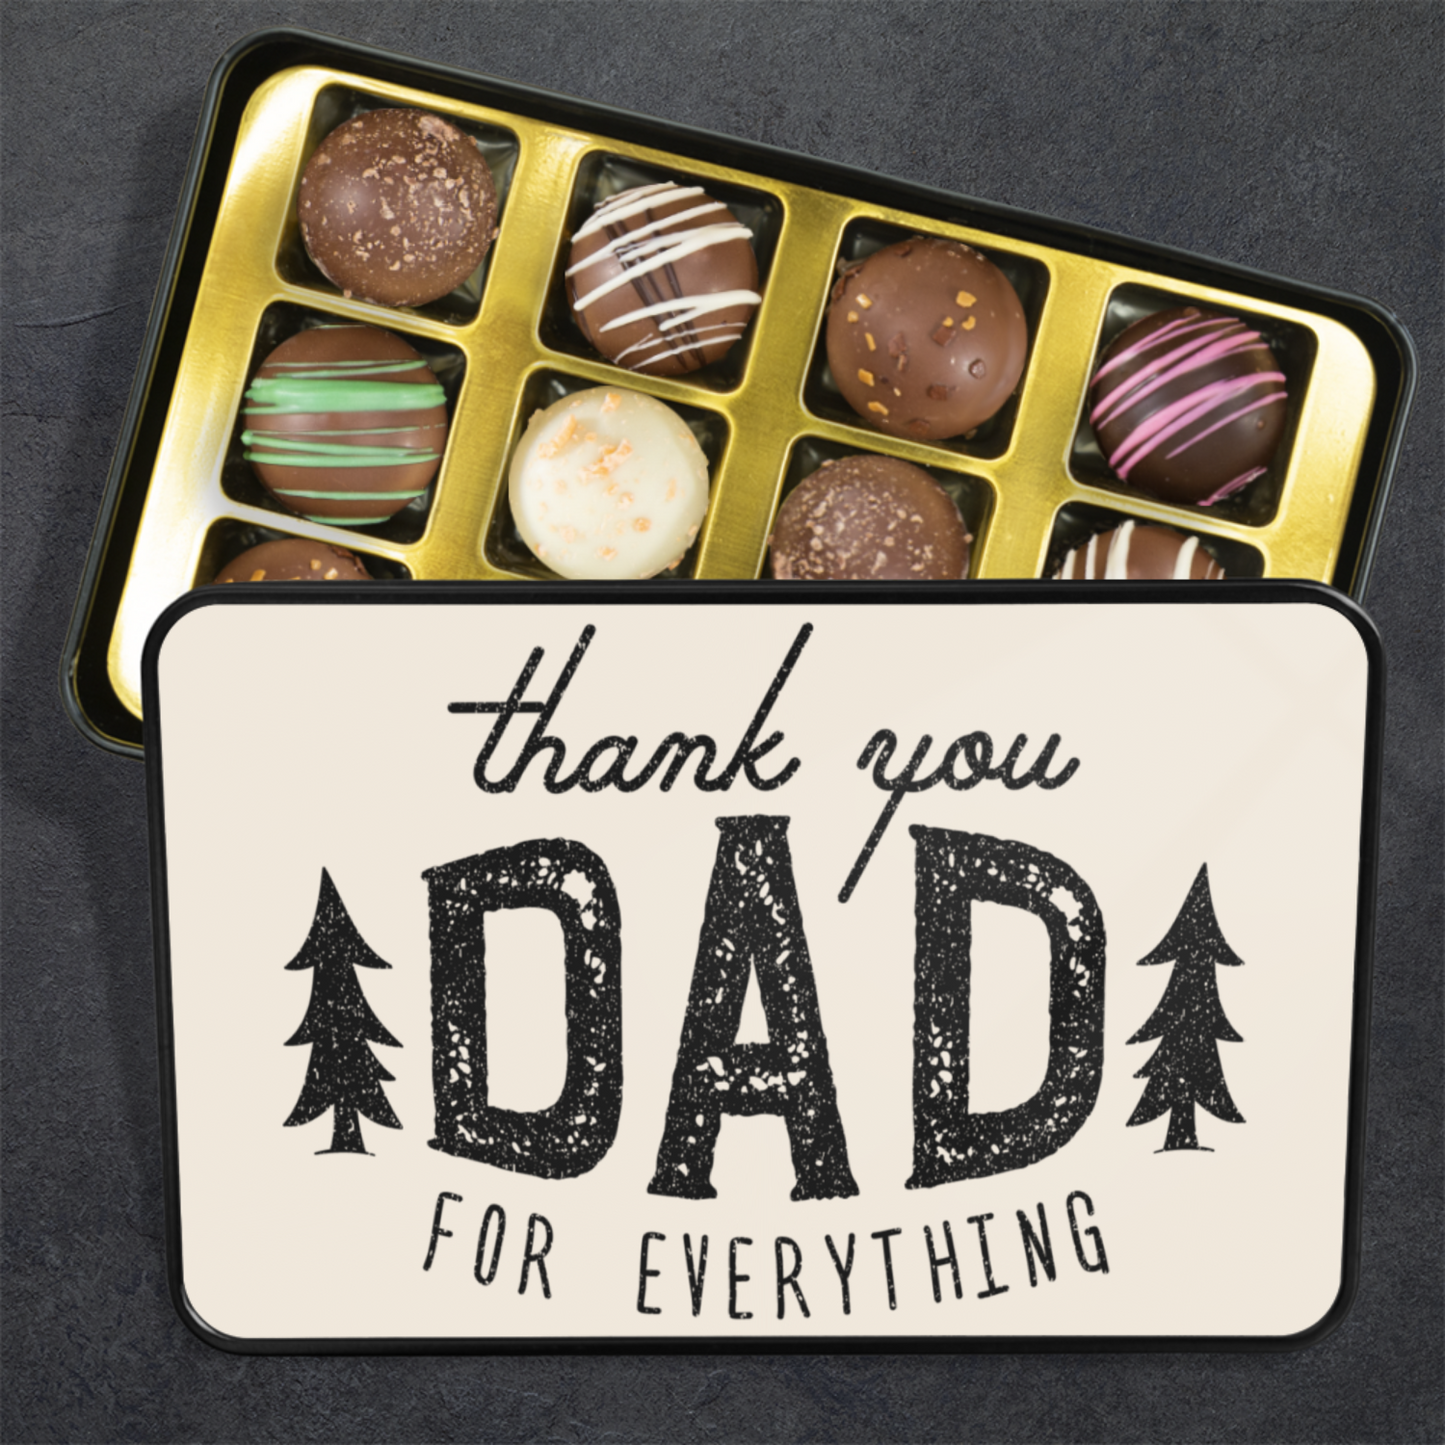 Thank You Dad for Everything Chocolate Truffle Gift Box